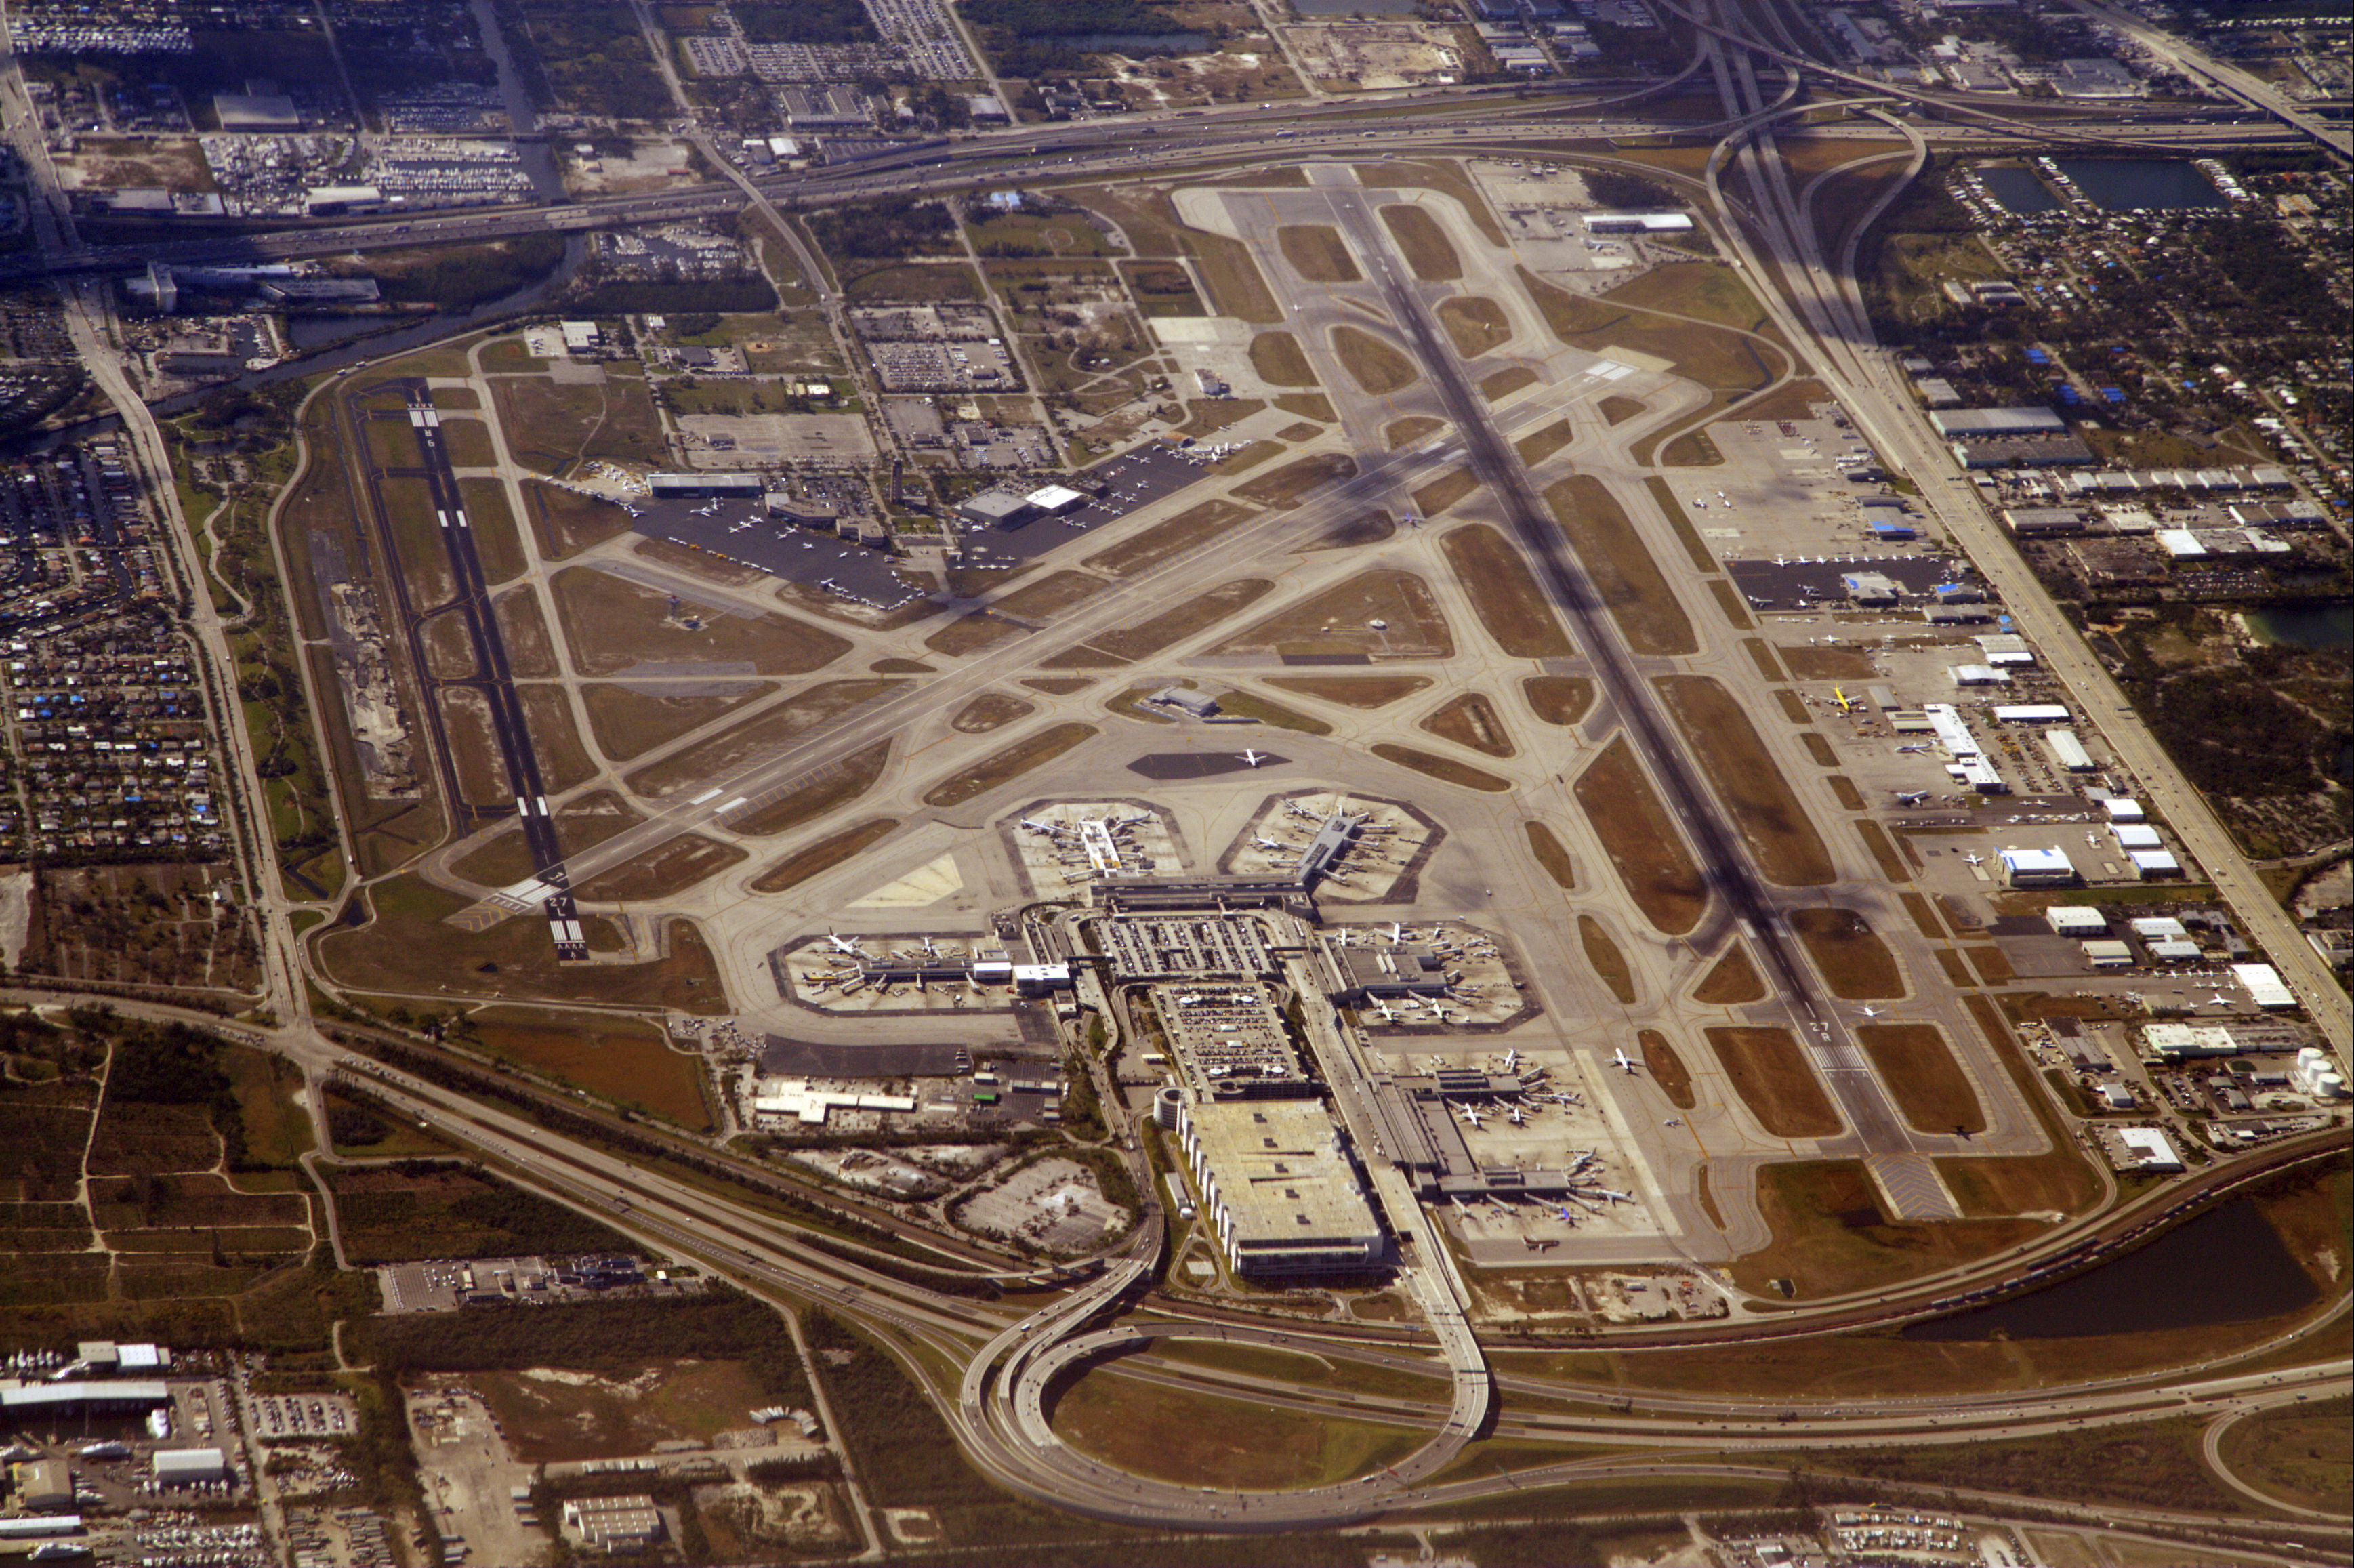 Wanted Since the 1950s: Airport Sites - How Airports Work ...